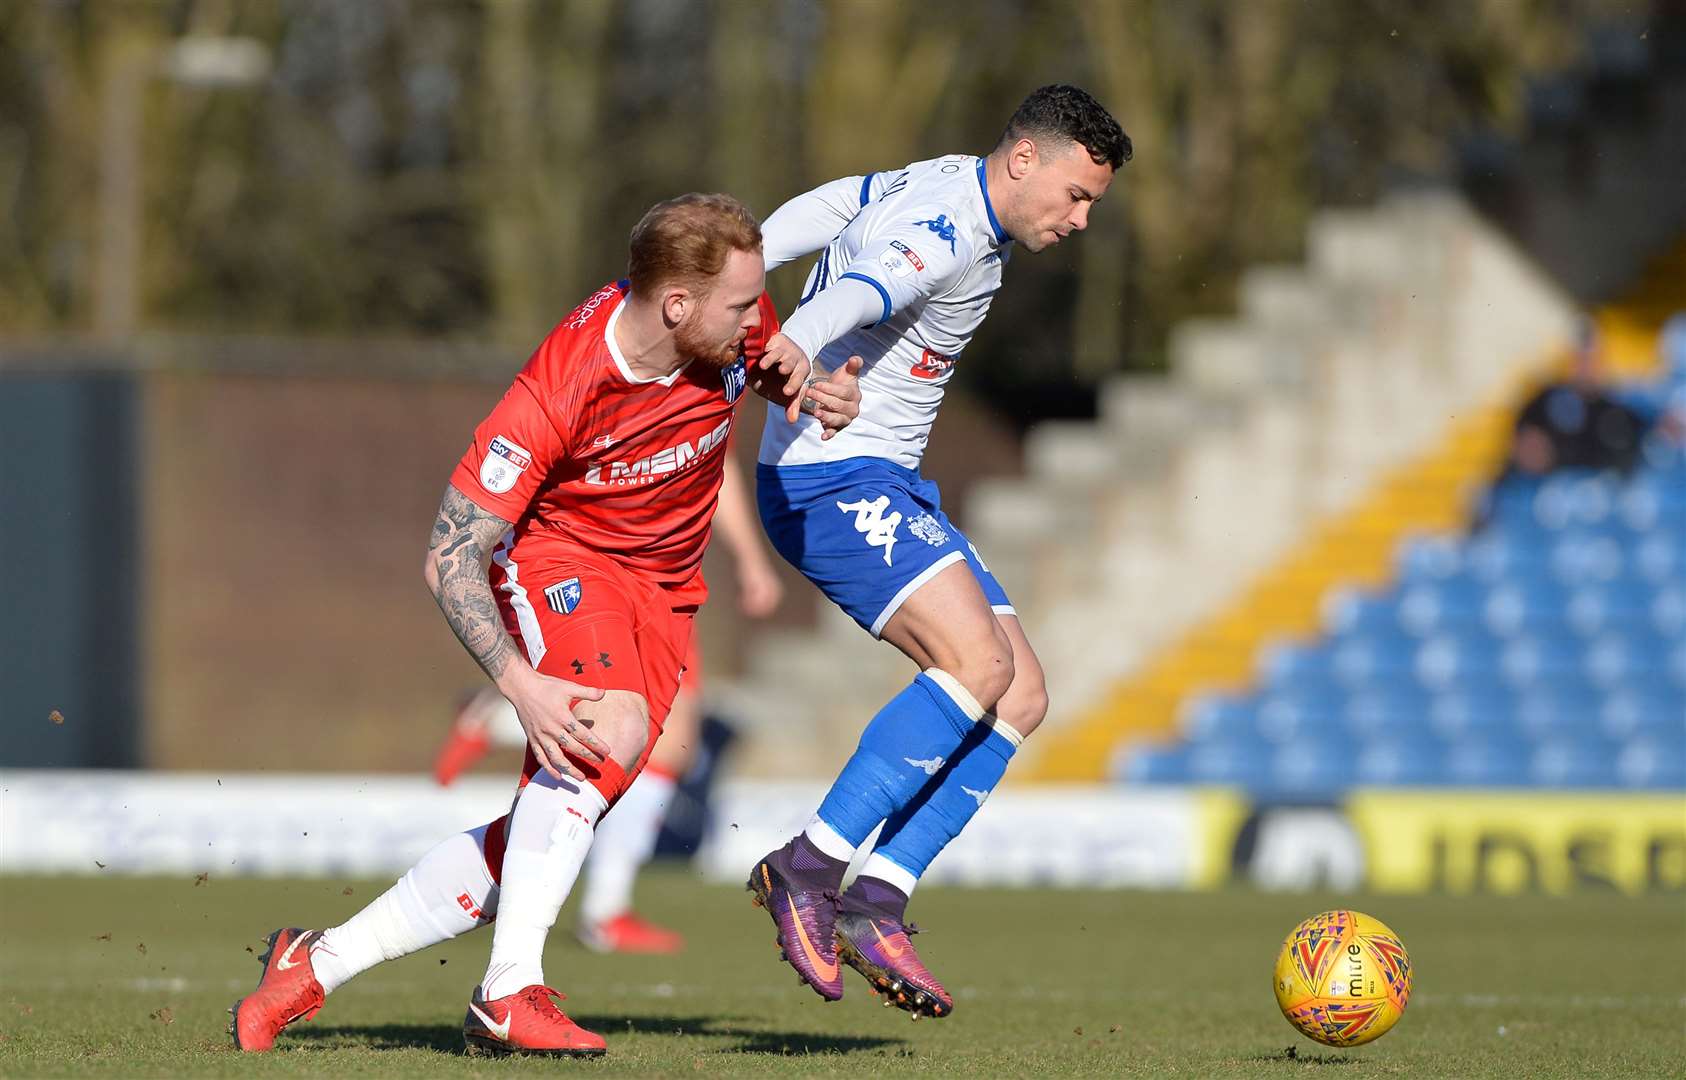 Gillingham’s Connor Ogilvie challenges with Bury's Zeli Ismail at Gigg Lane